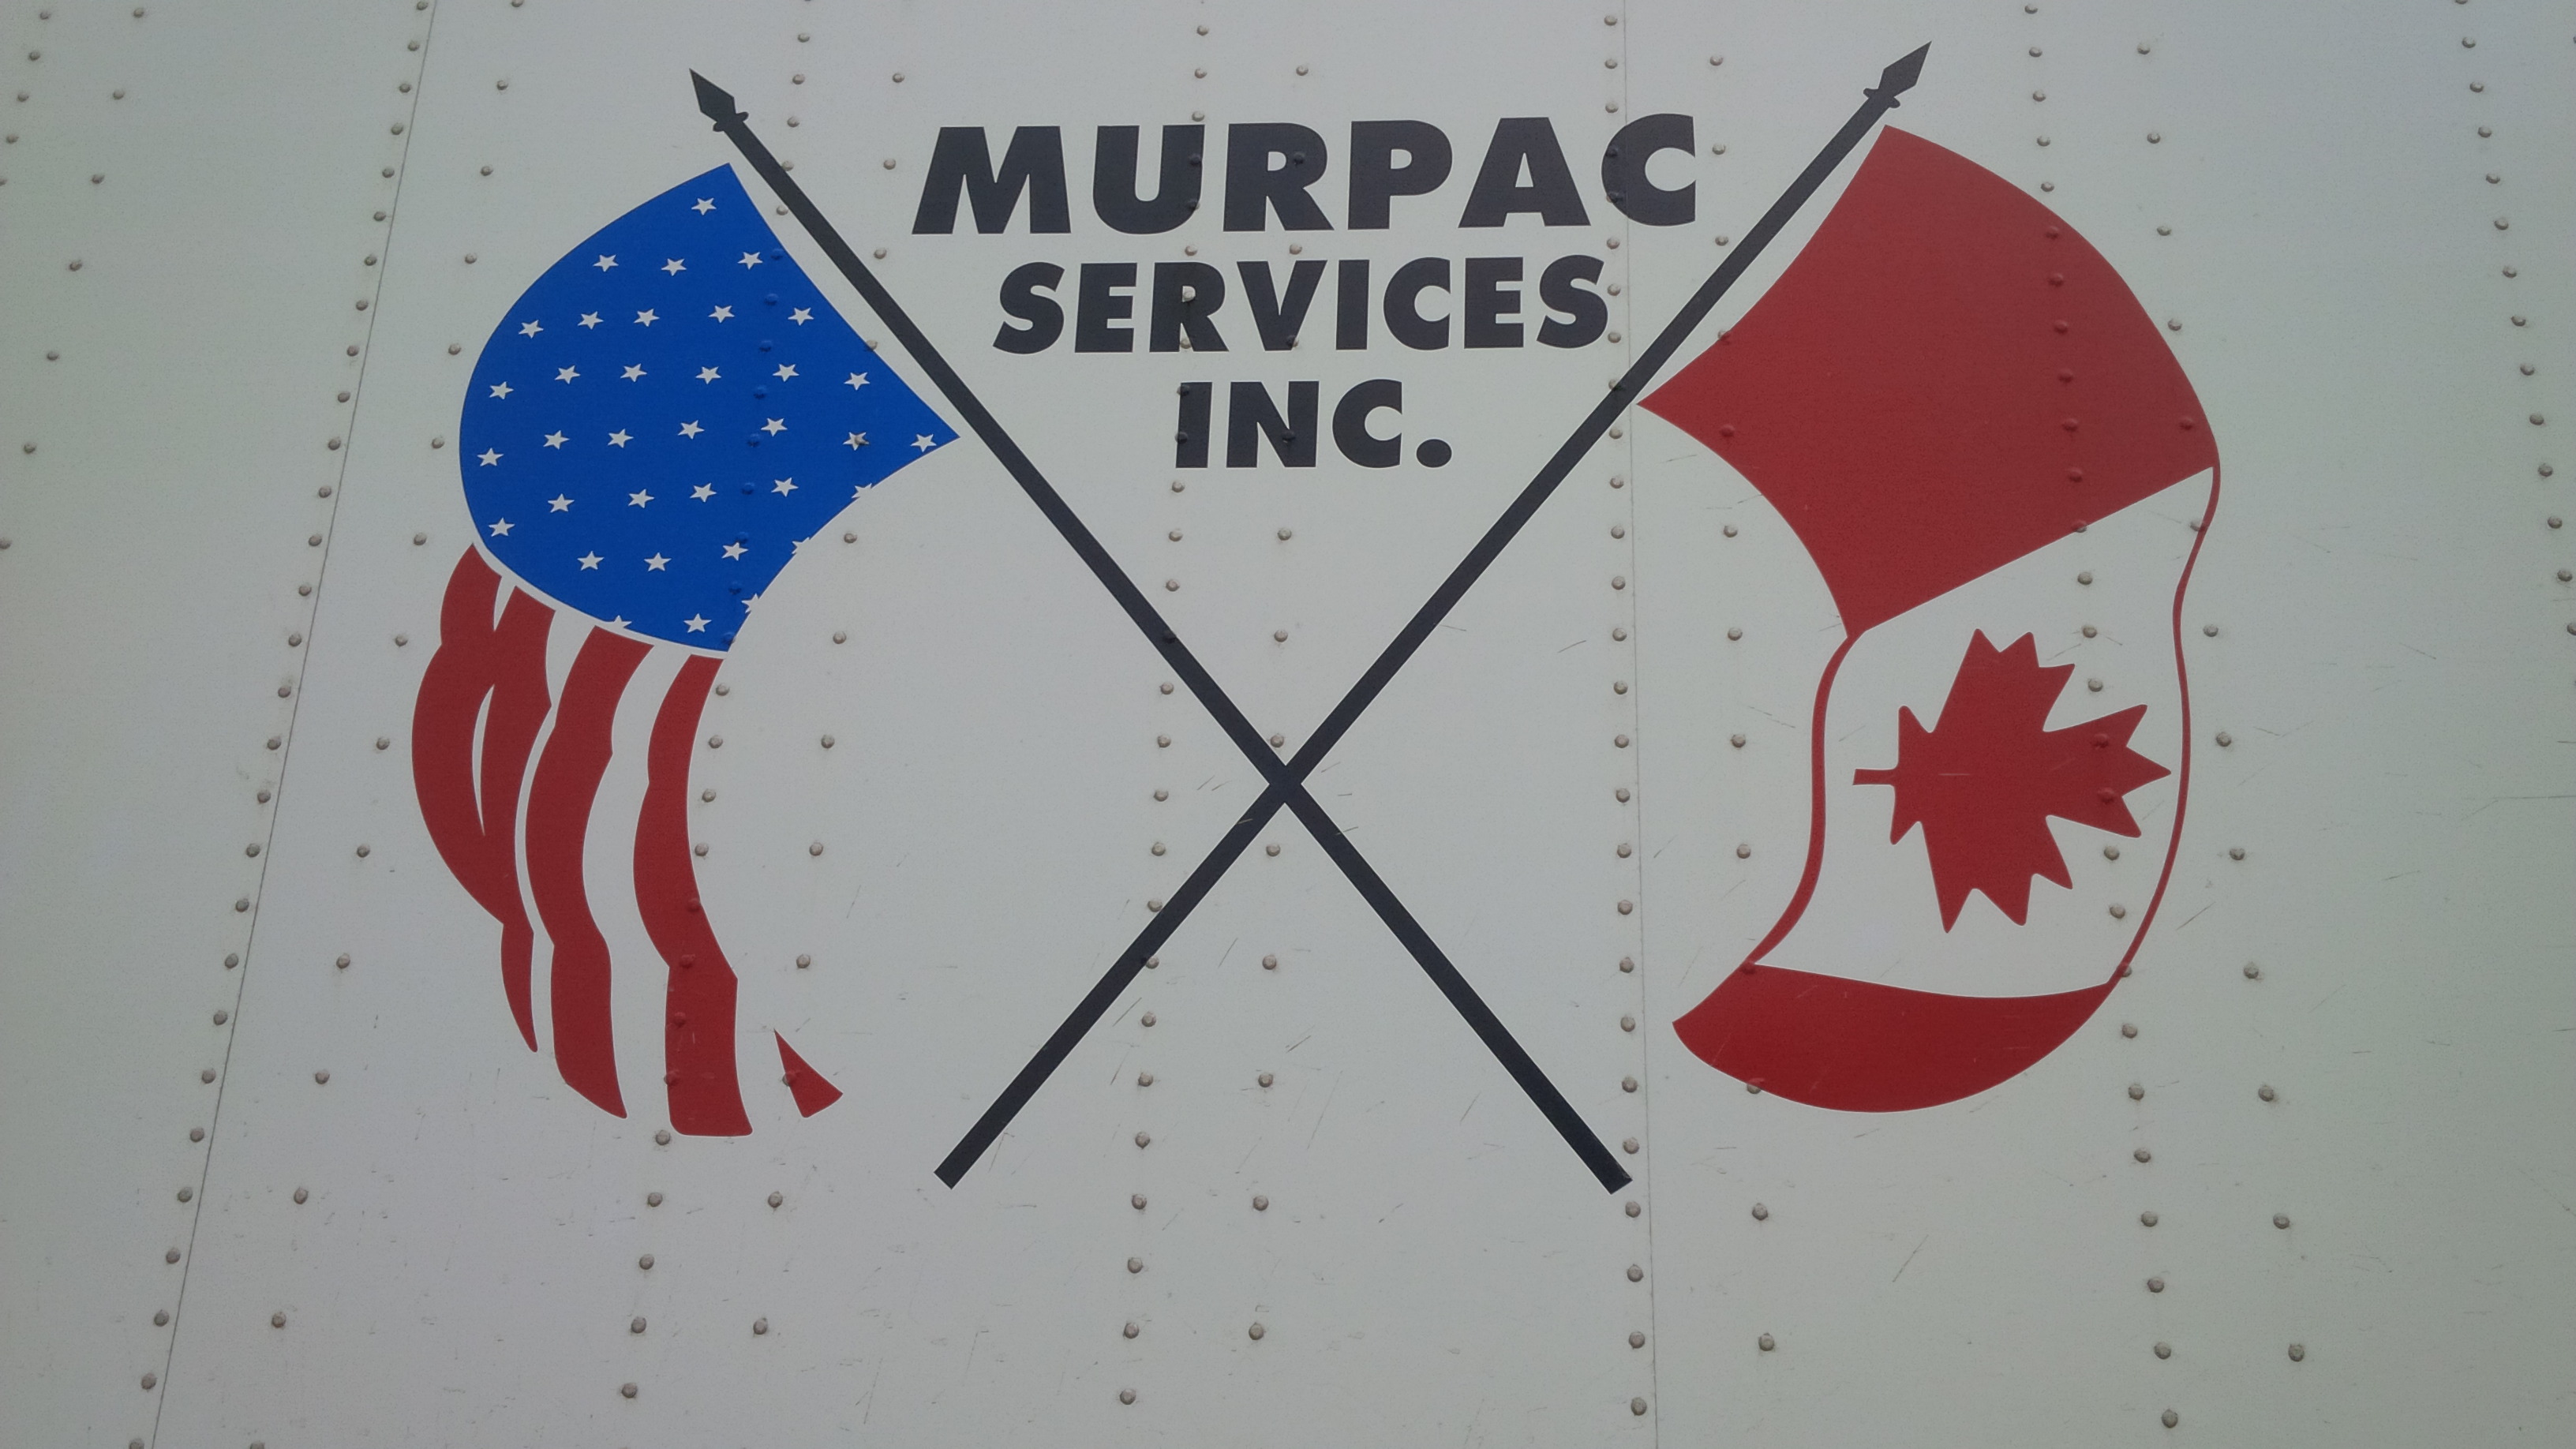 Murpac Services Logo Picture.jpg